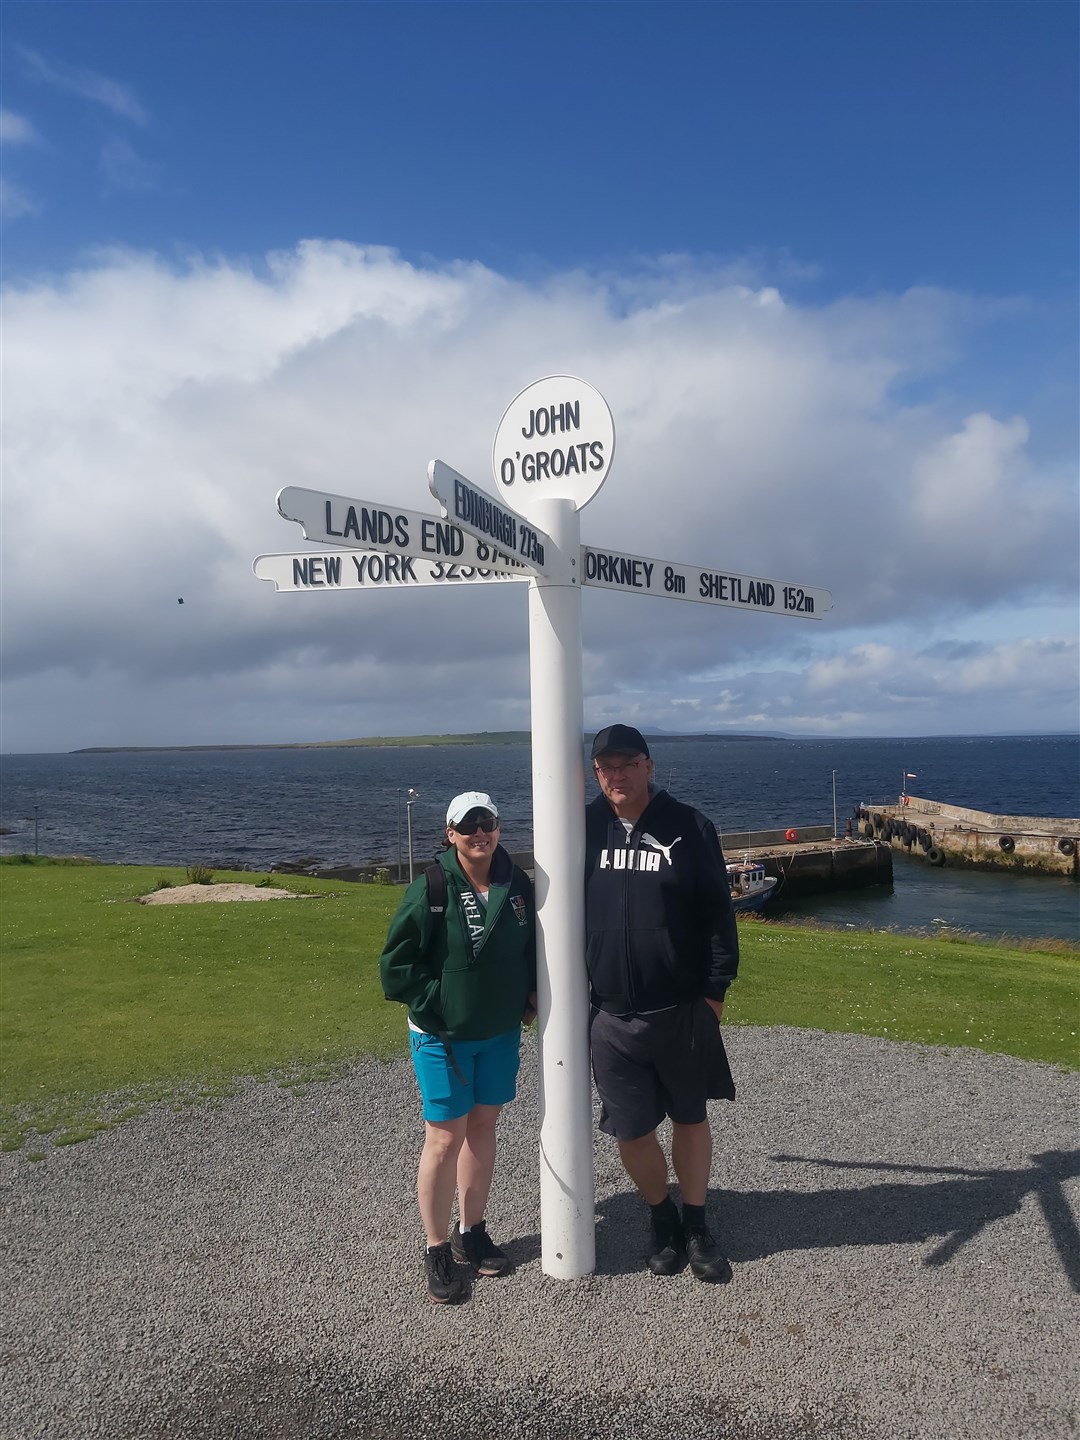 It had to be done. The traditional picture at John O'Groats.